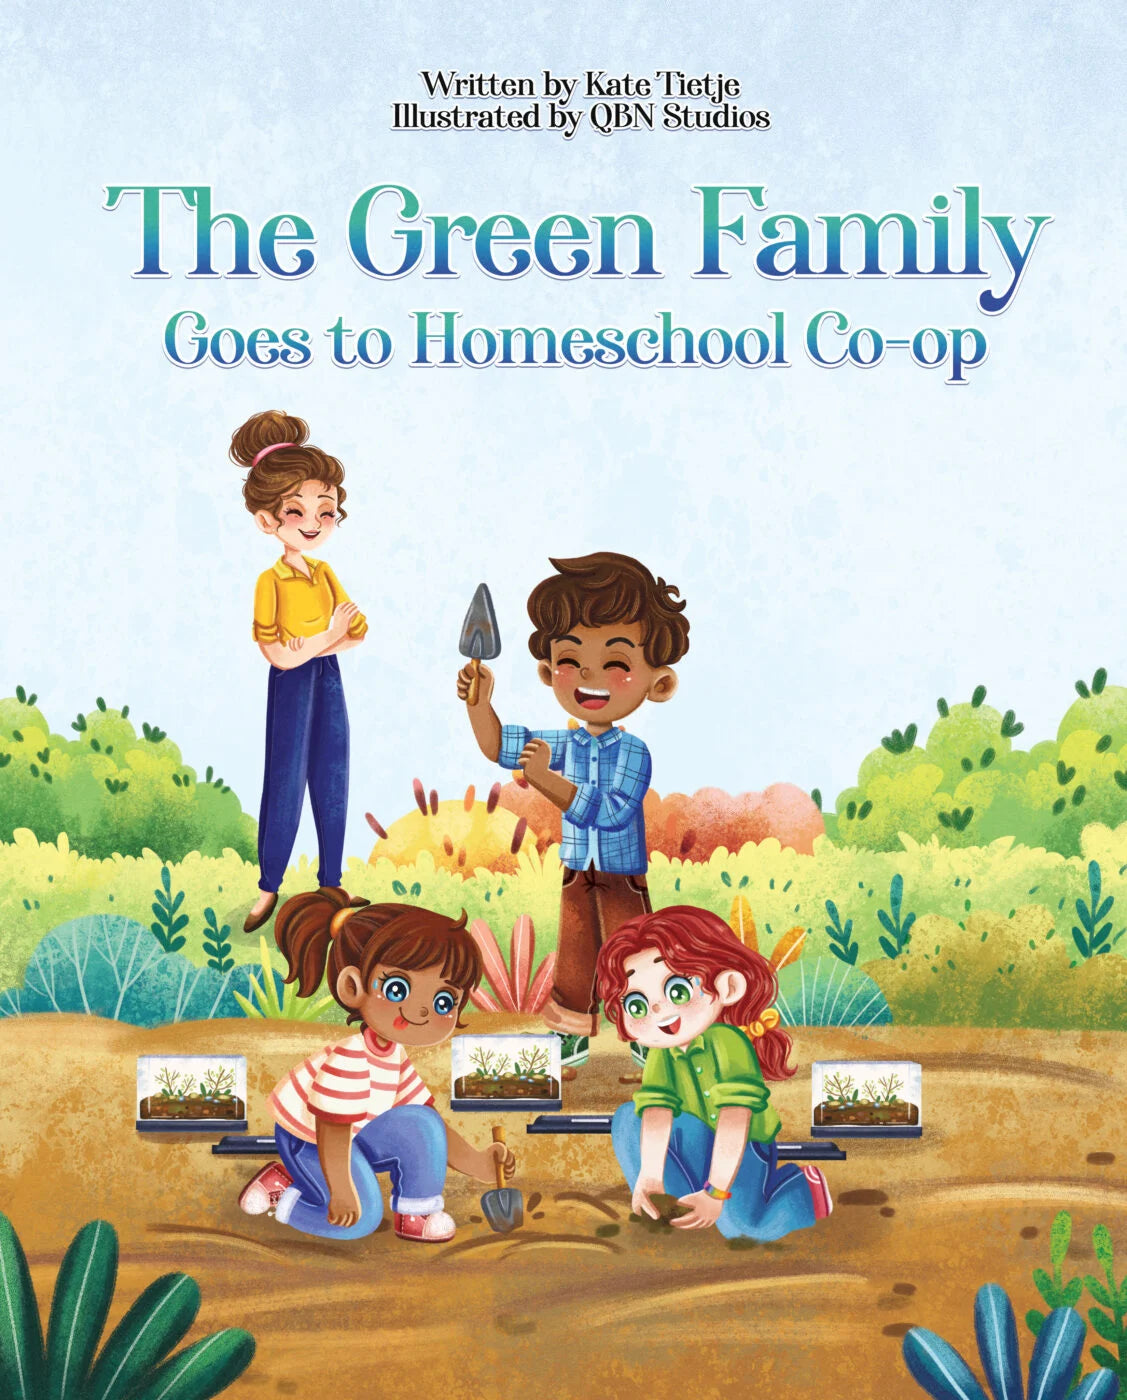 Earthley The Green Family Goes to Homeschool Co-Op - Children's Book